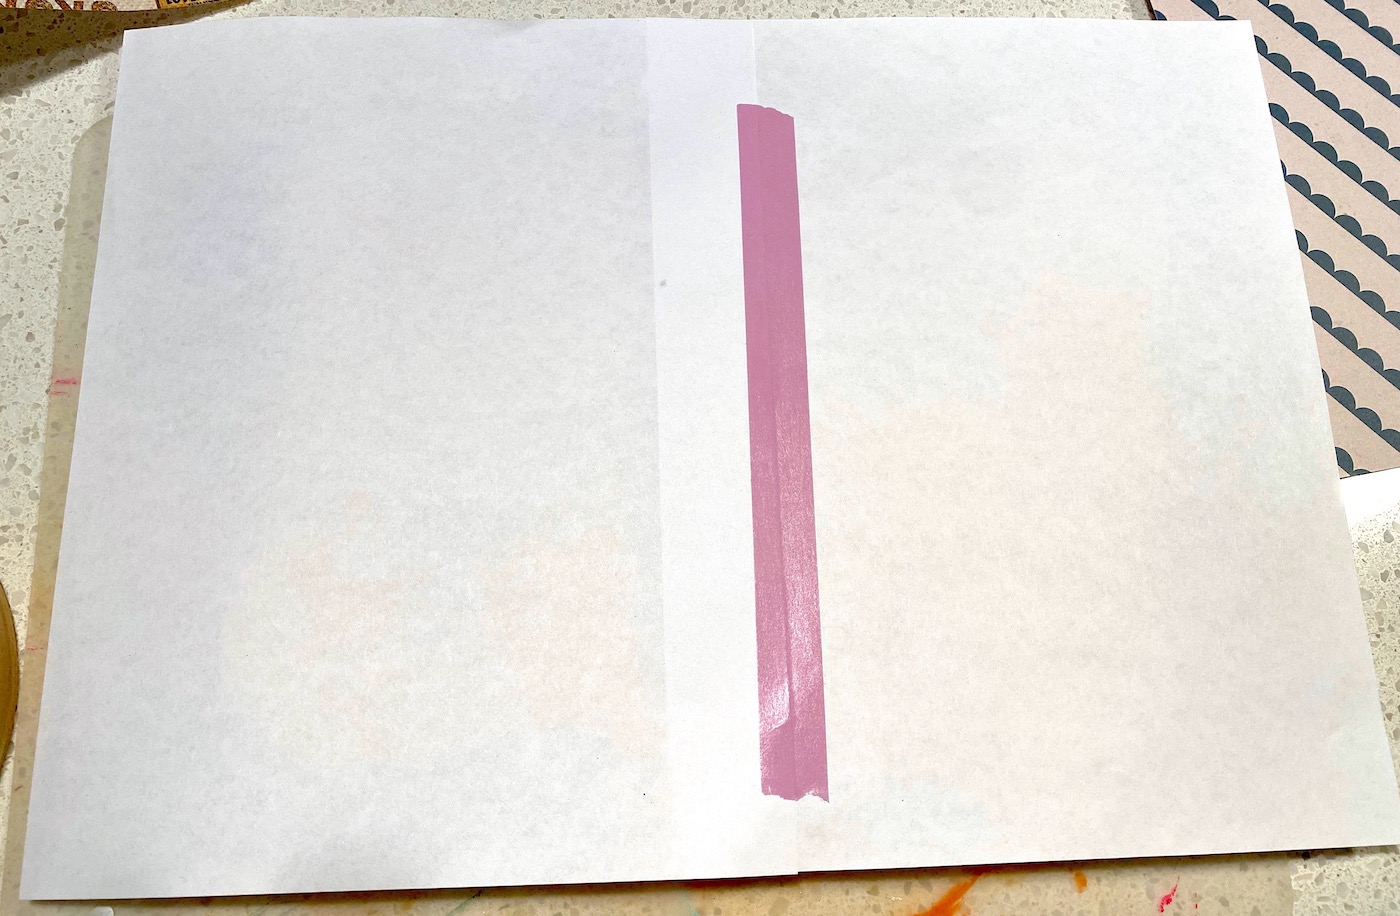 Two pieces of paper taped together with washi tape